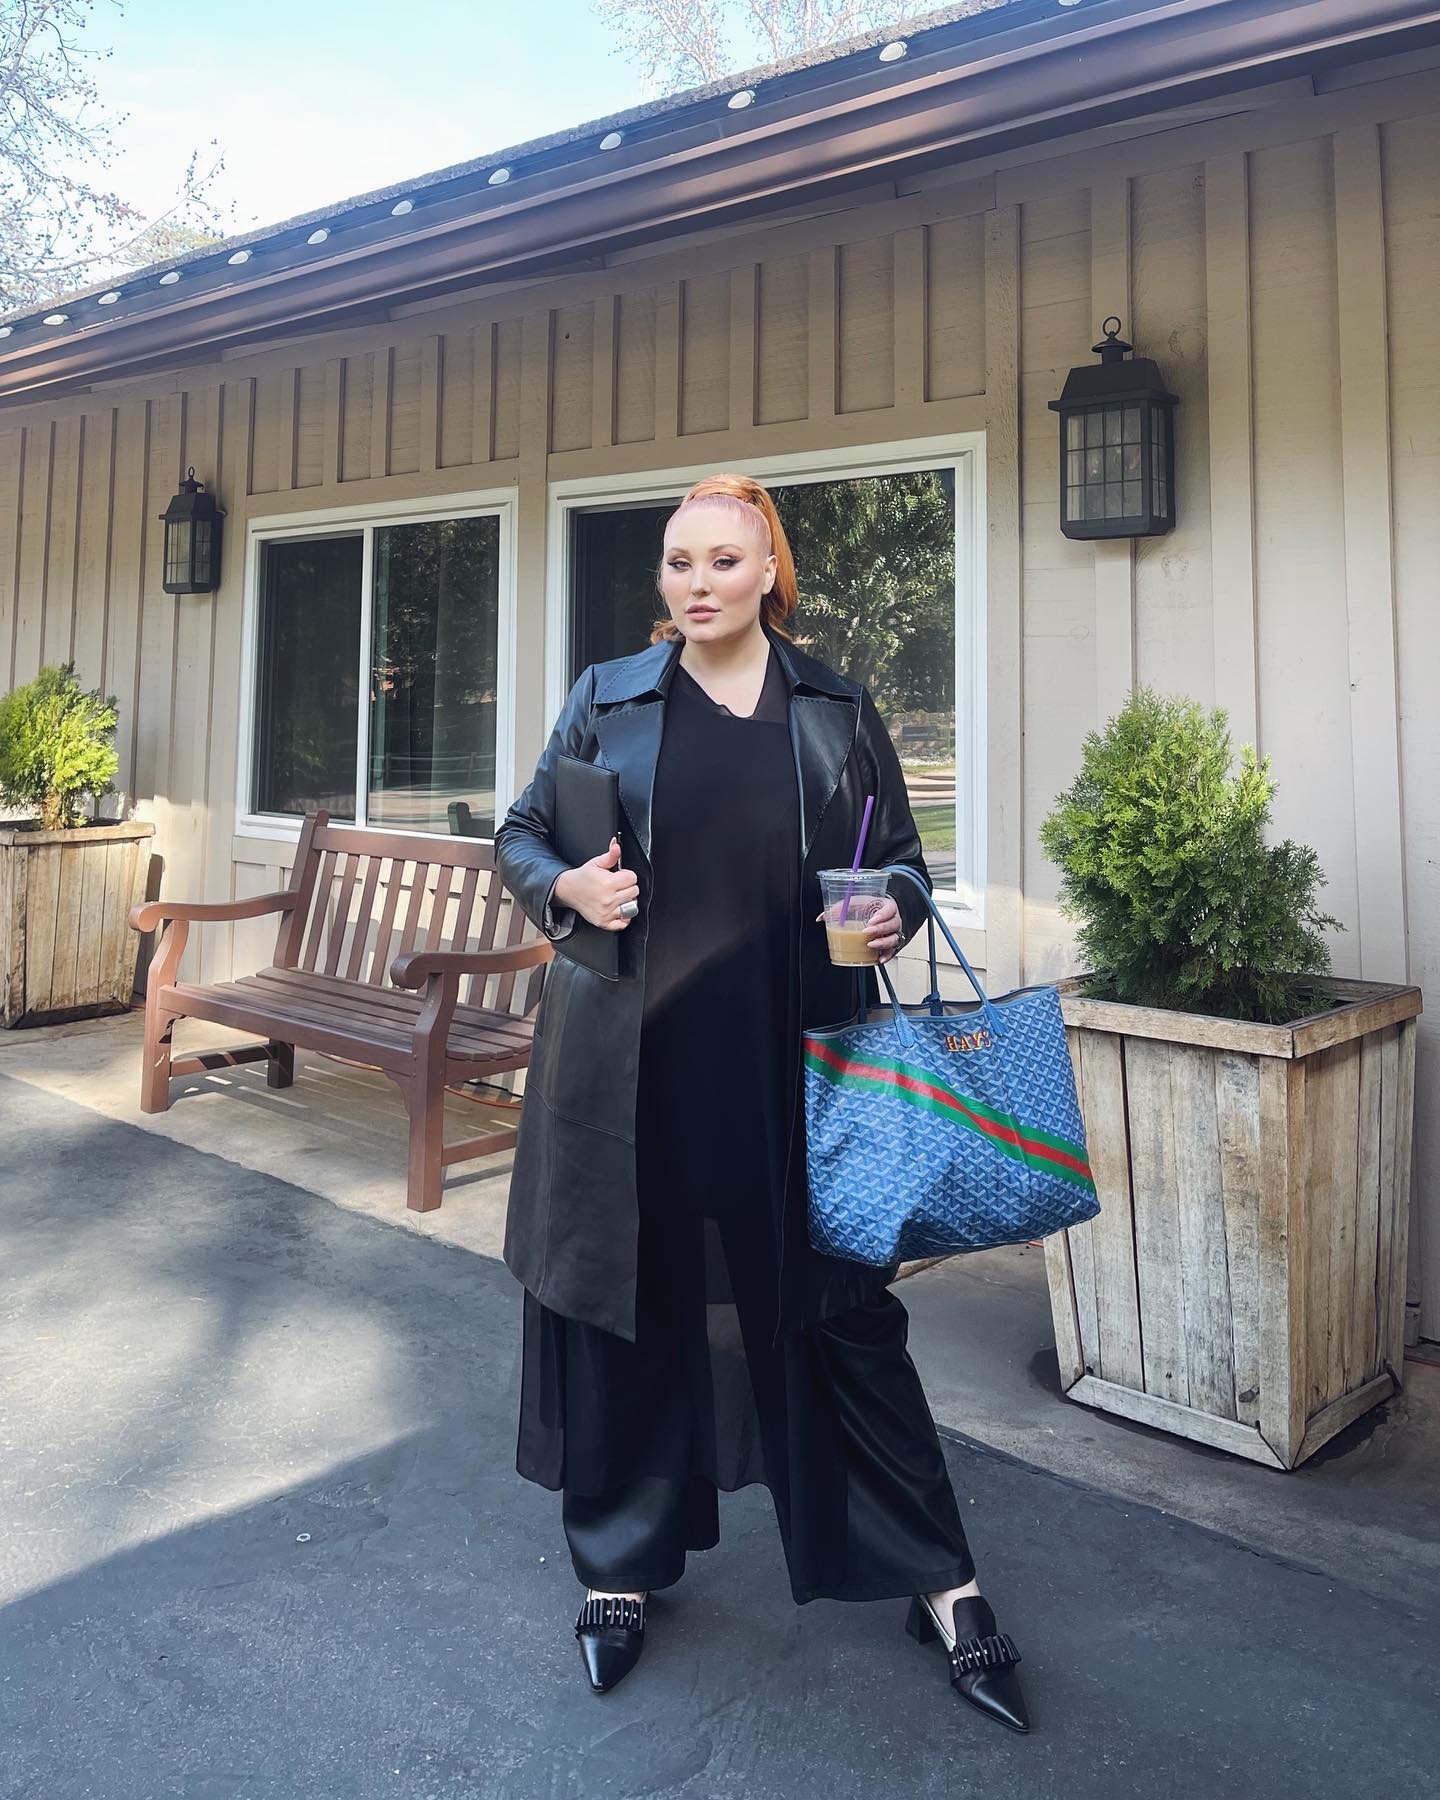 Photo by hayley amber hasselhoff in Temecula Creek Inn with @tay @michelemariepr @soiaandkyo @marina.rinaldi @goyardofficial and @danielauribeofficial. May be an image of overcoat and cloak